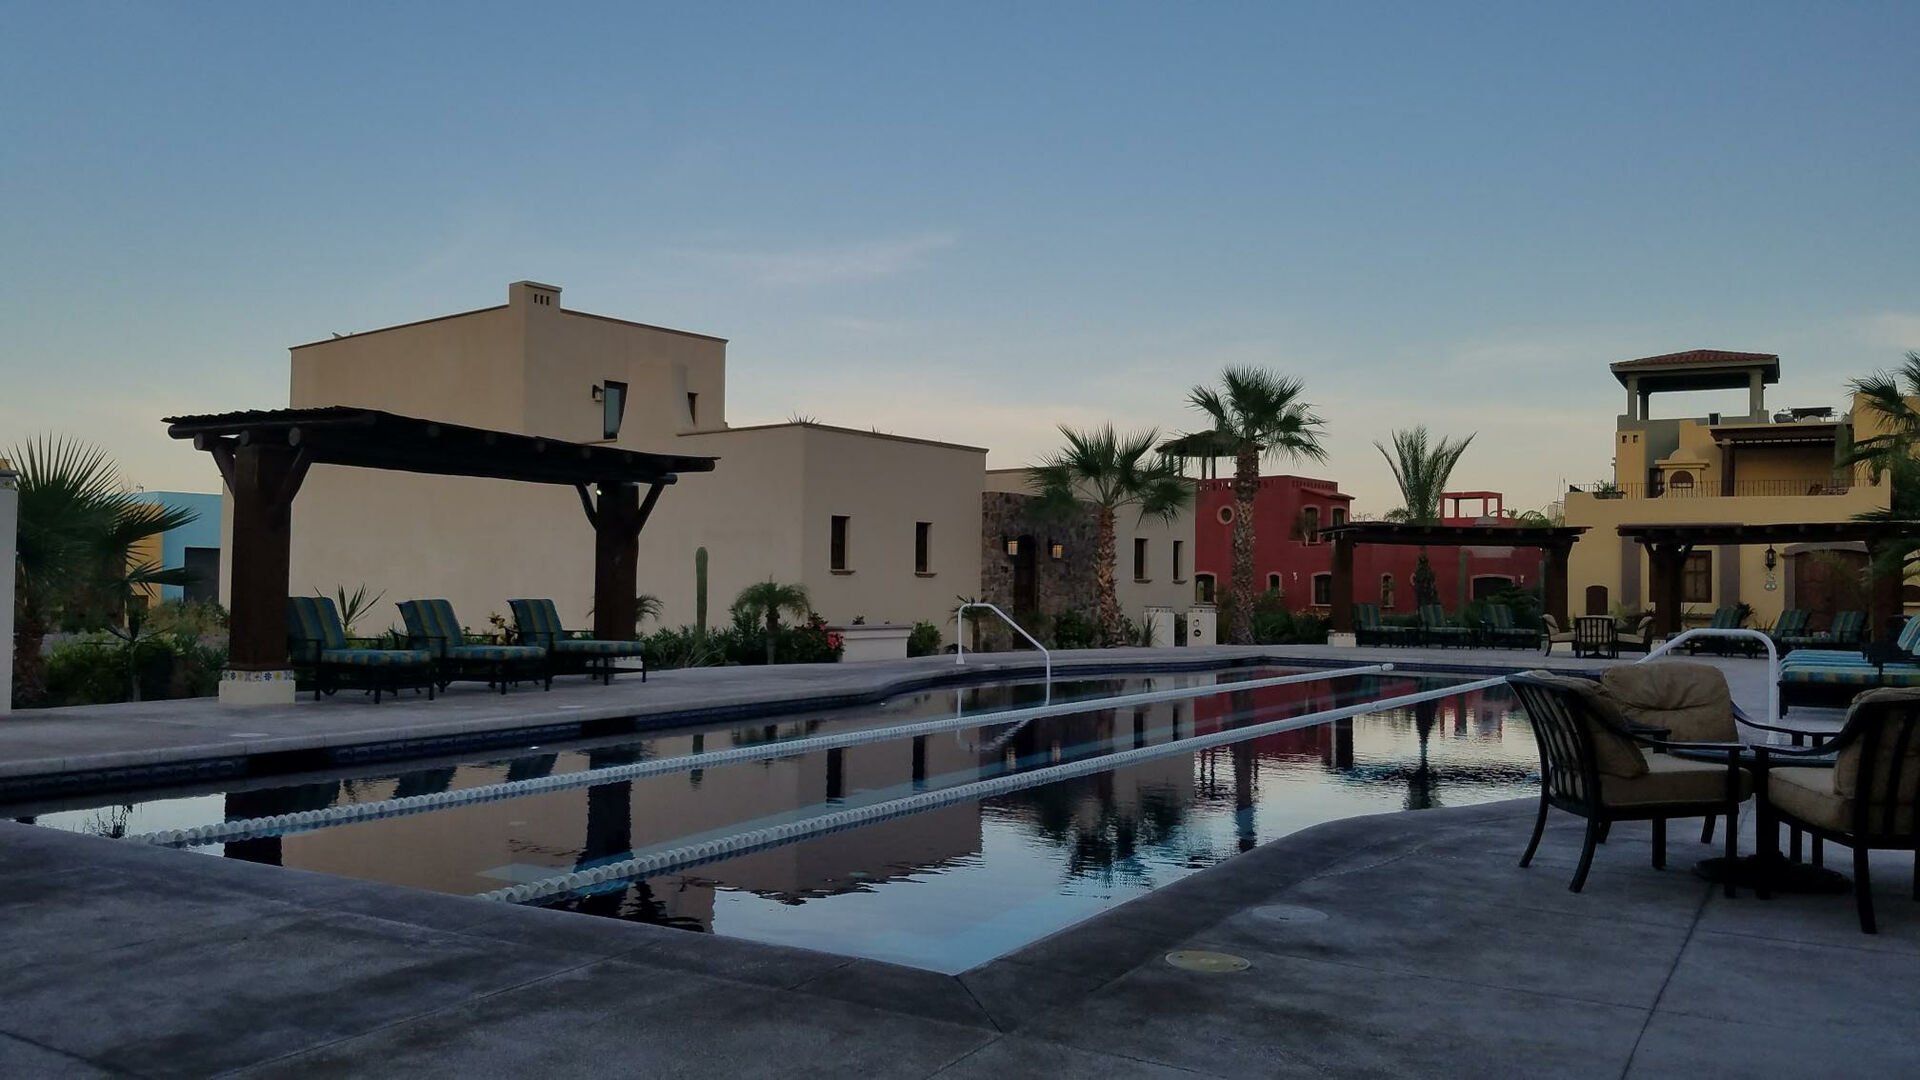 Lap Pool in our community